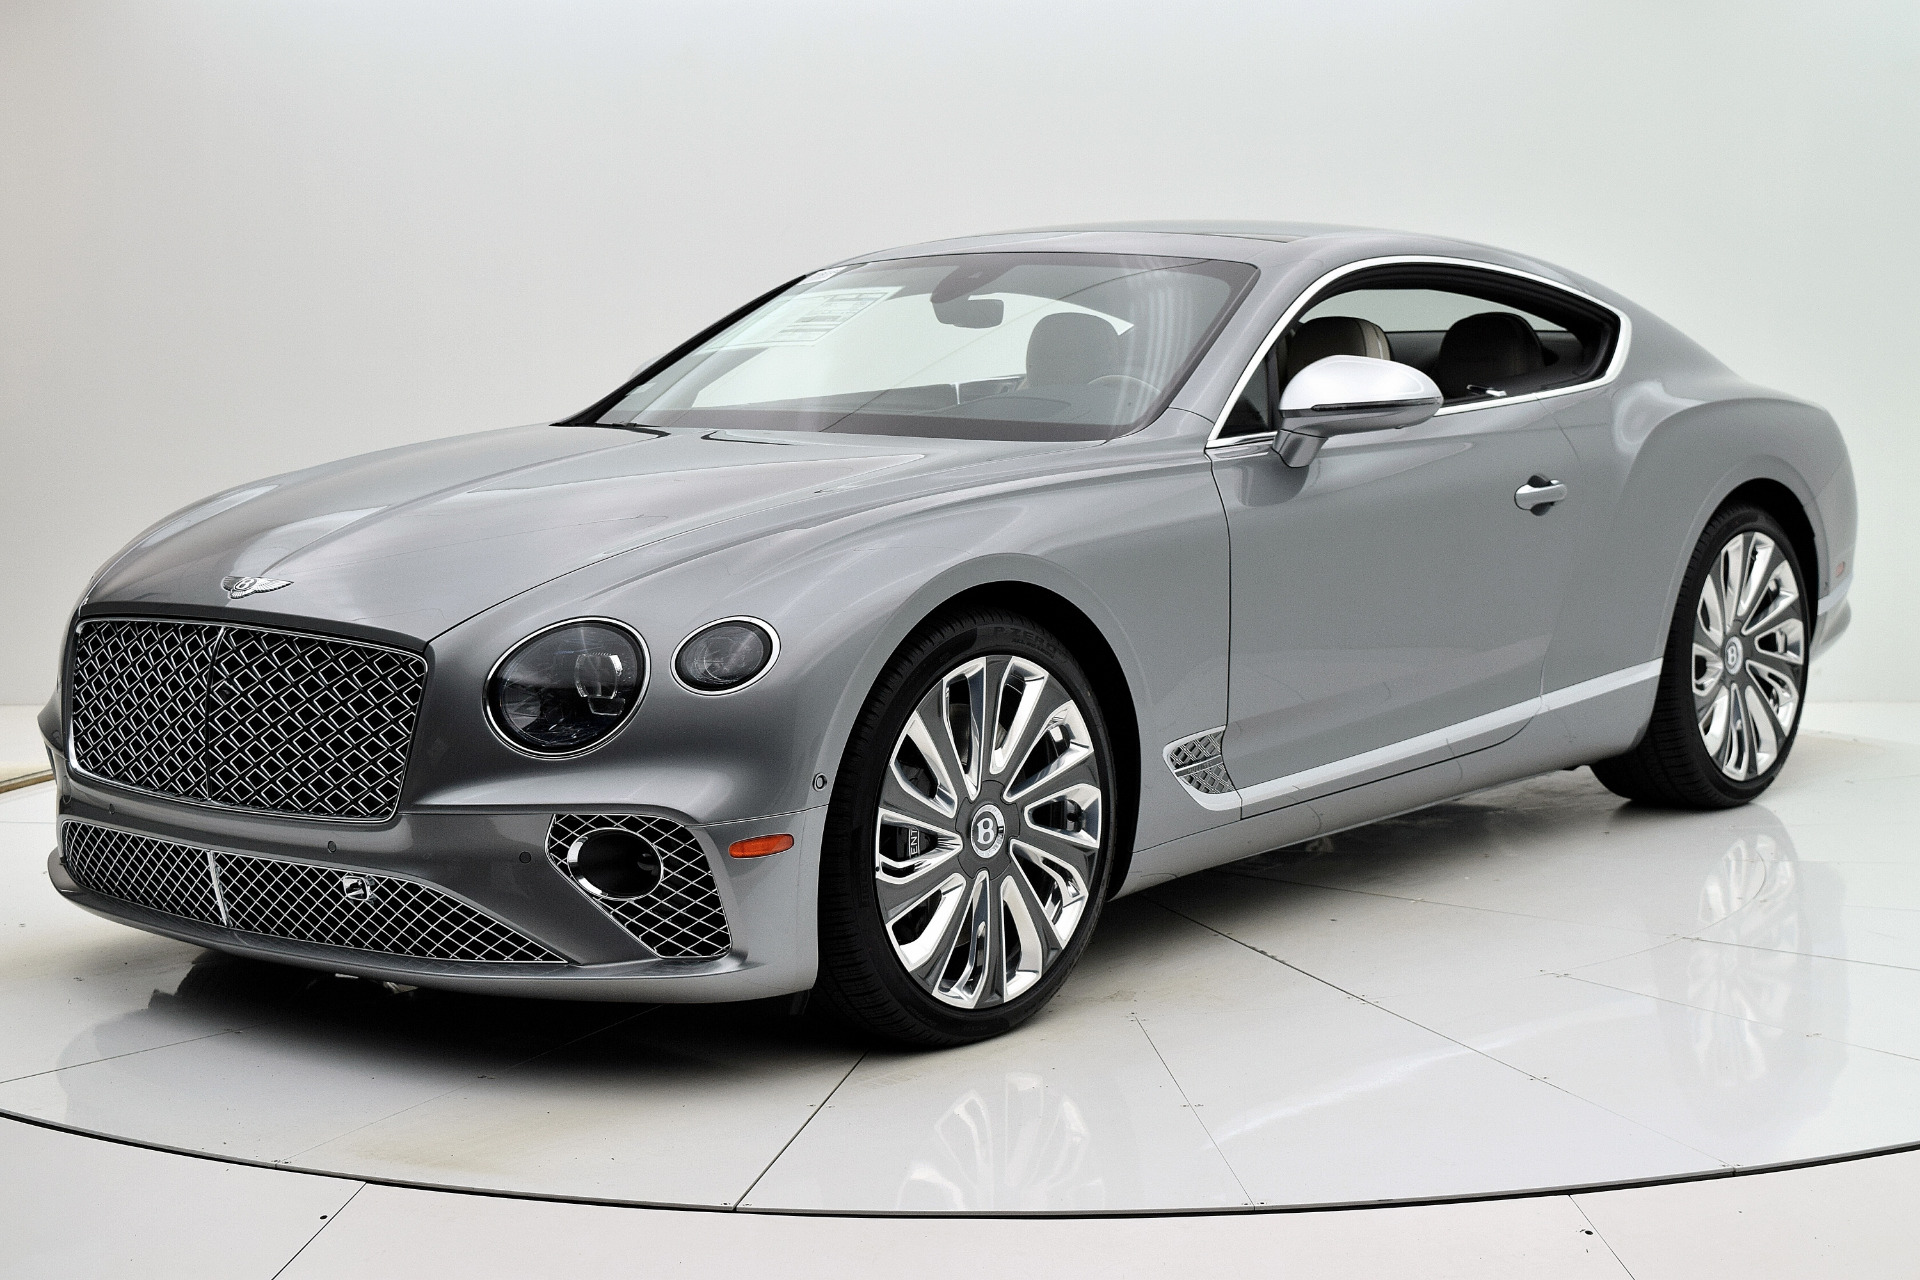 New 2021 Bentley Continental GT V8 Mulliner Coupe for sale Sold at Bentley Palmyra N.J. in Palmyra NJ 08065 2